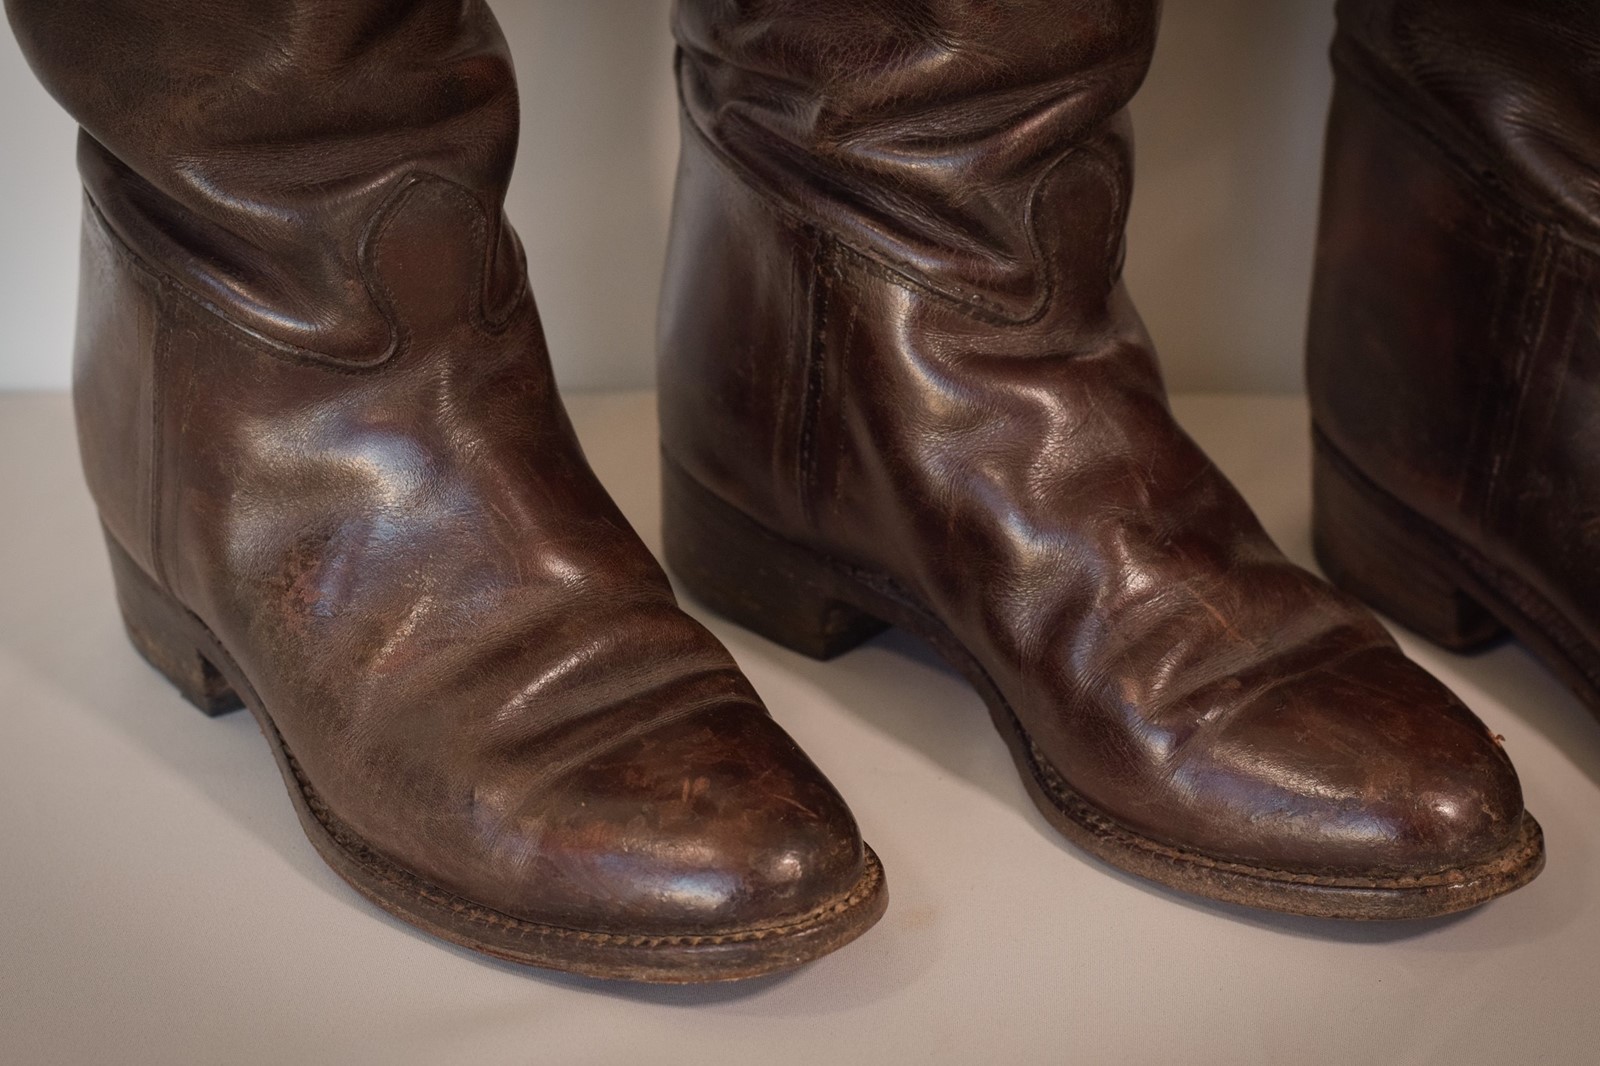 Antique leather Boots - Clothing